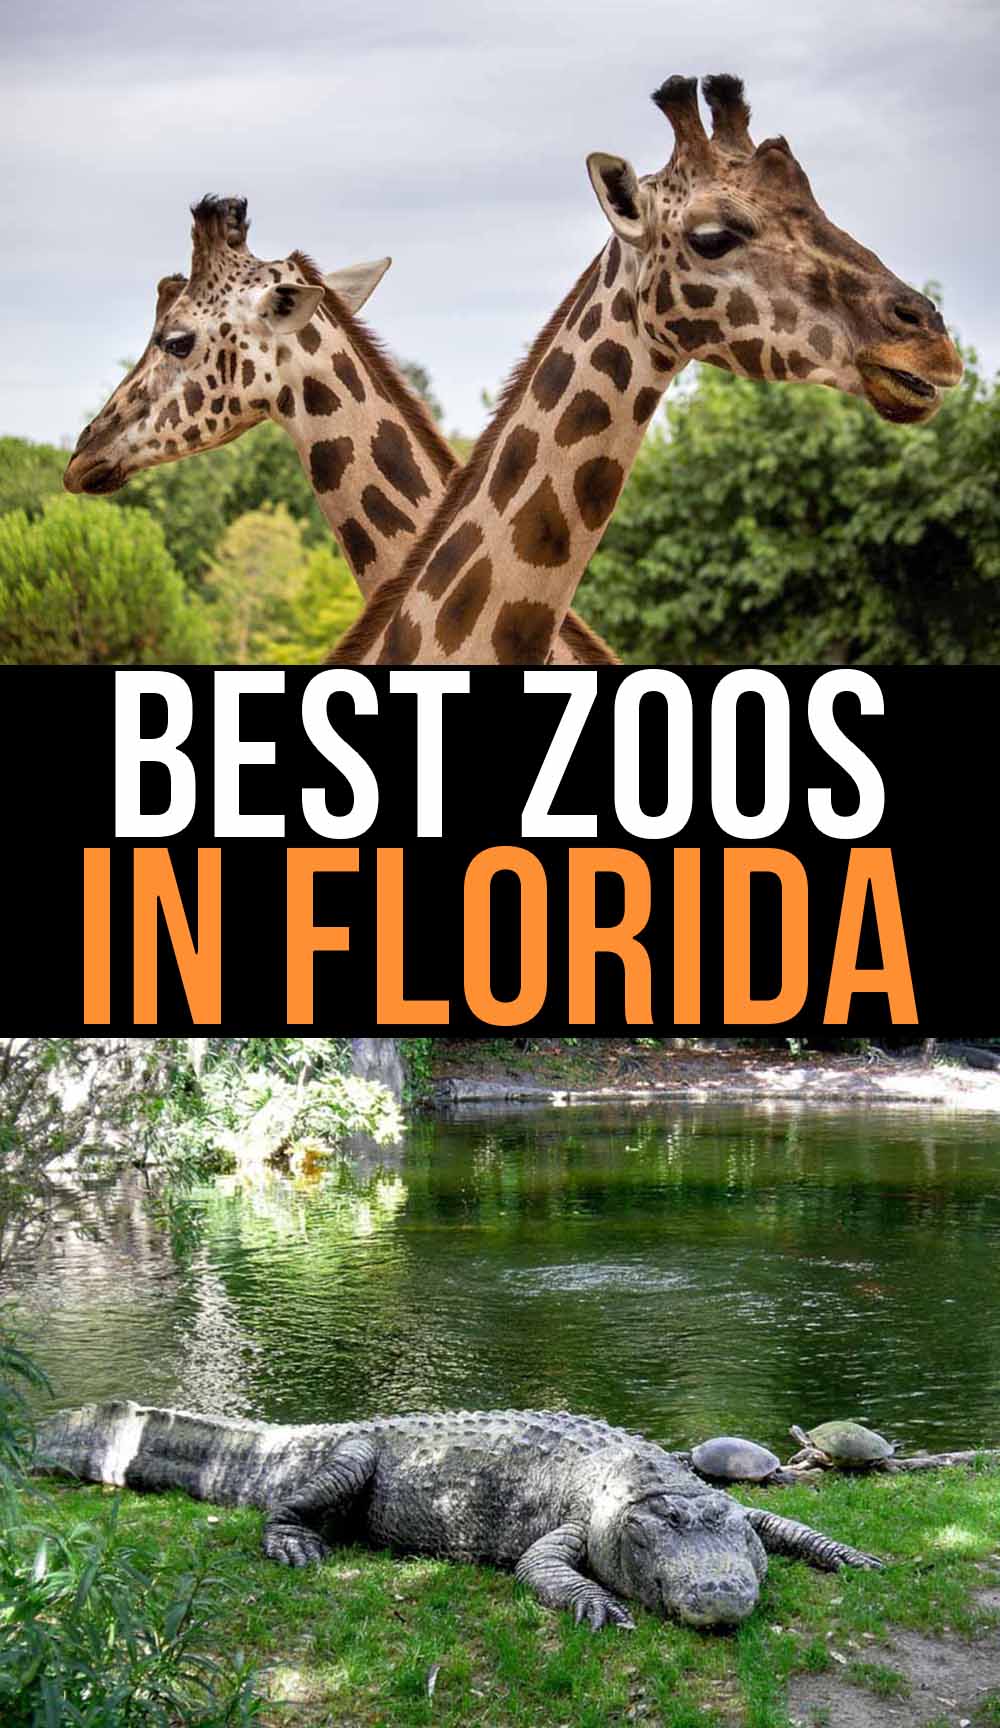 The Best Zoos in Florida